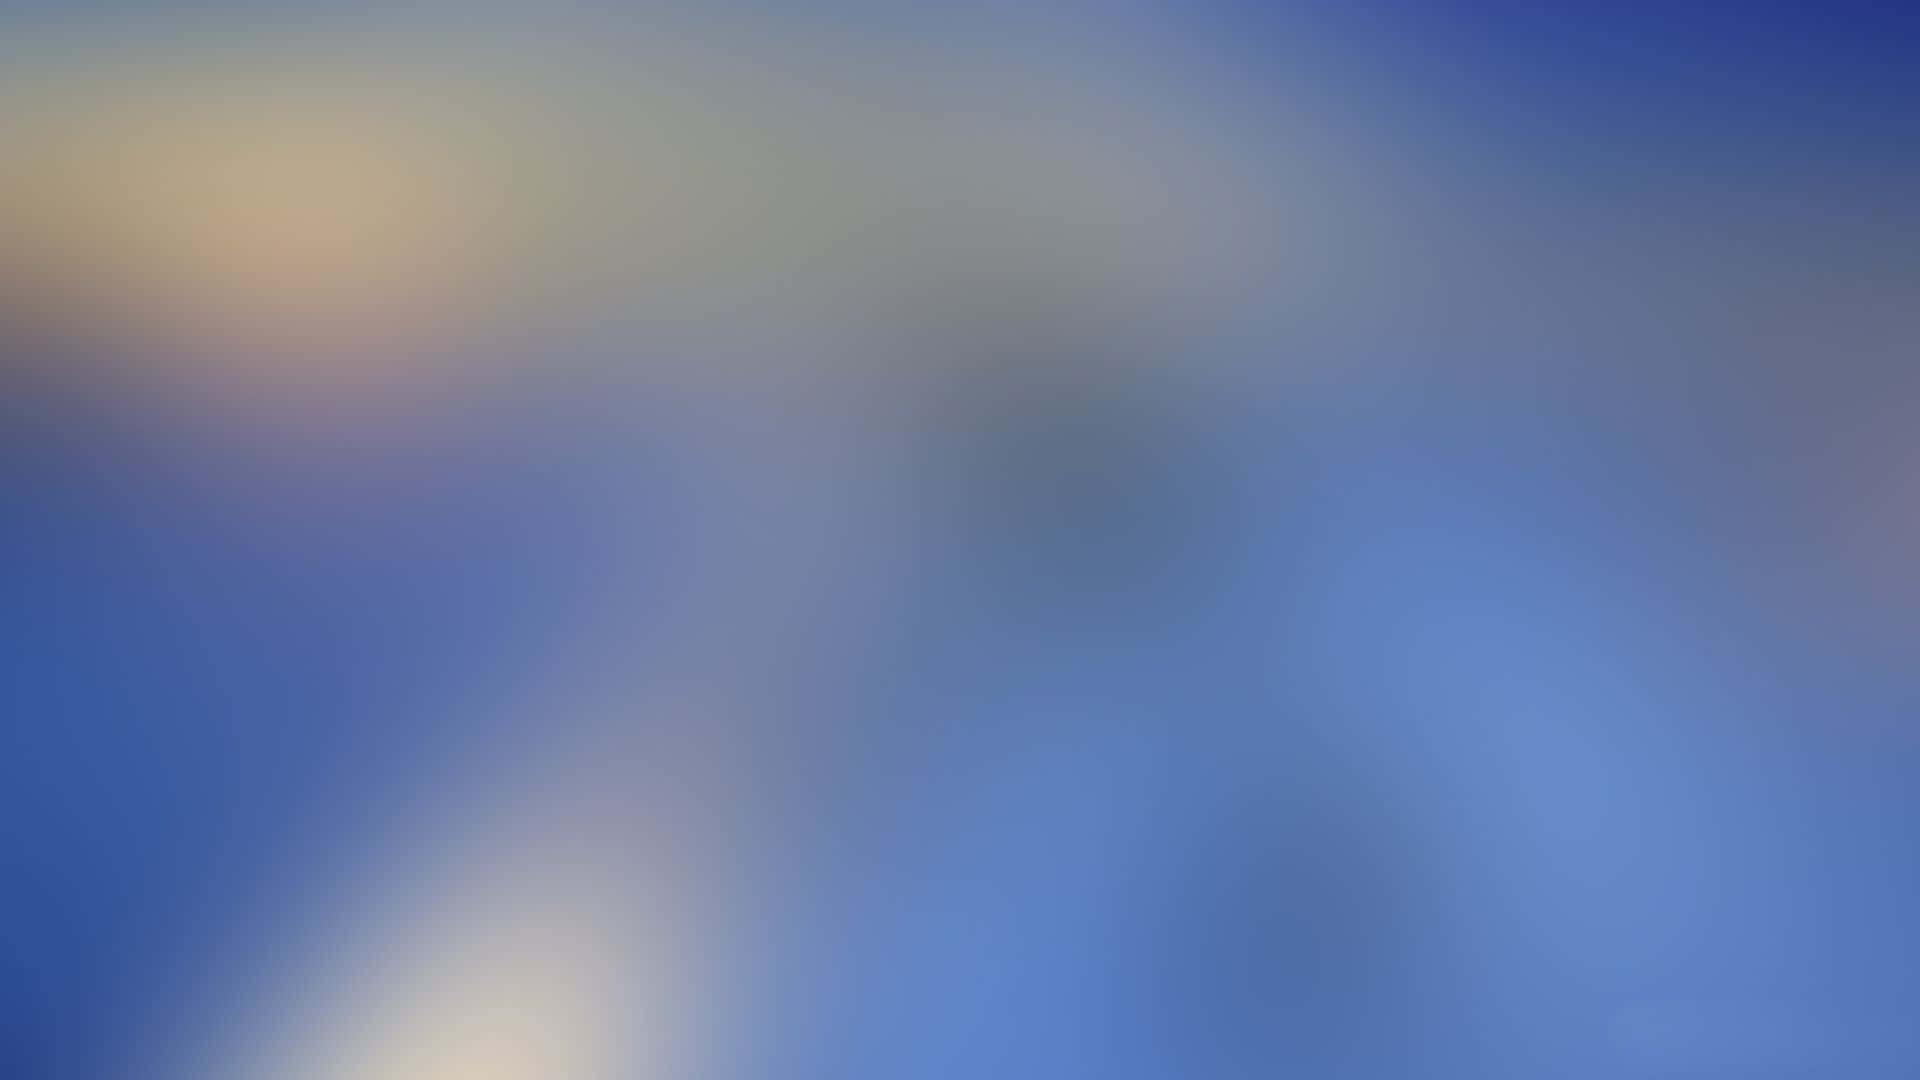 Marvelous Yellow And Blue Gradient Background